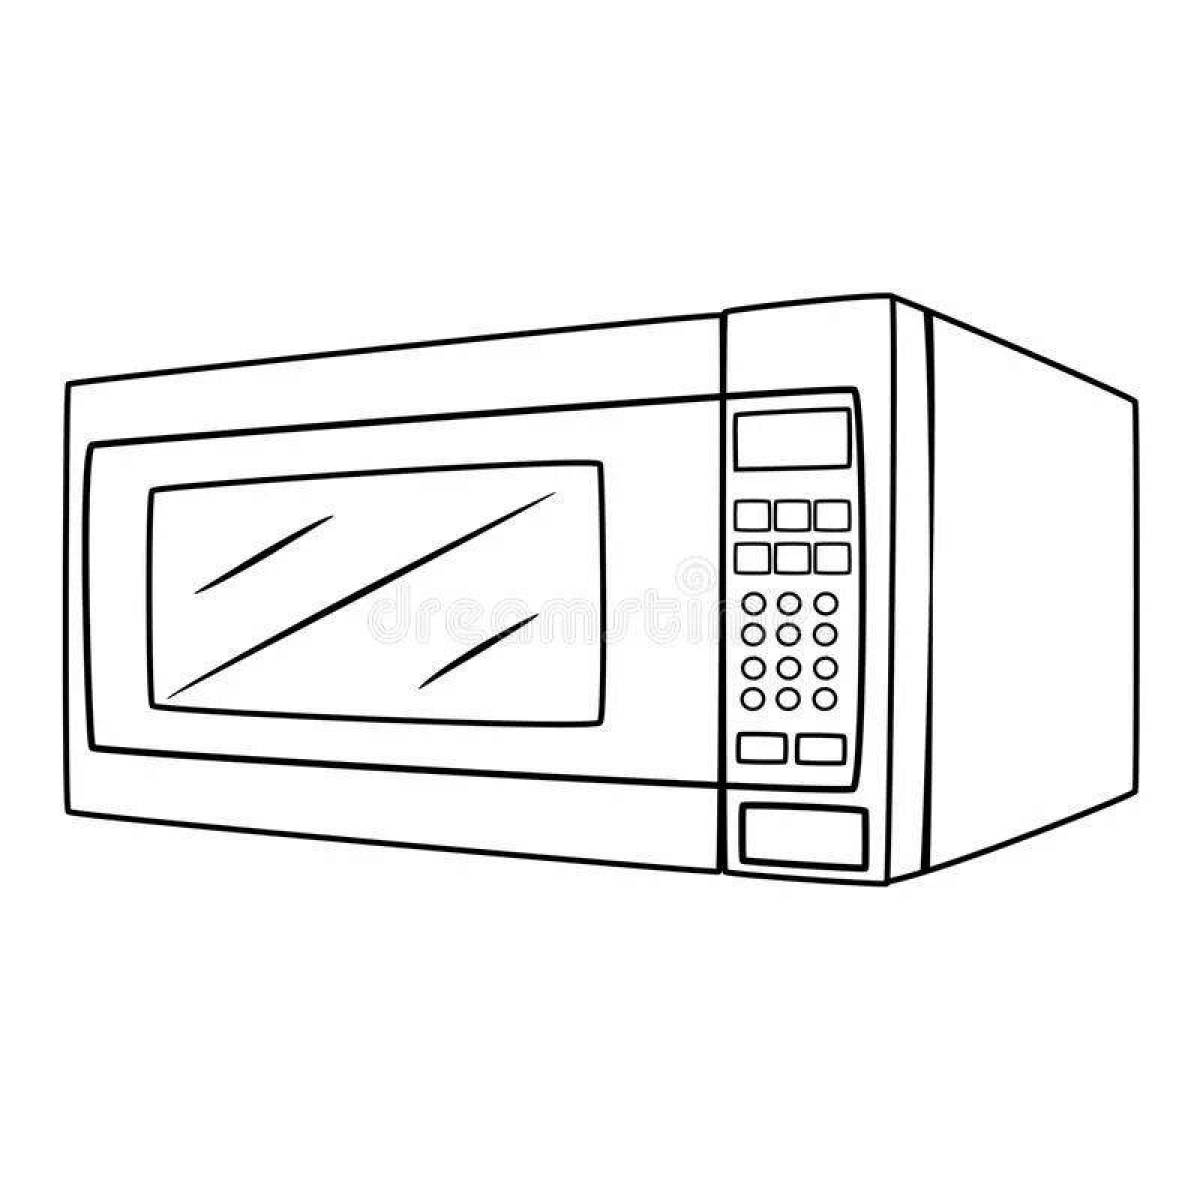 Cool microwave coloring book